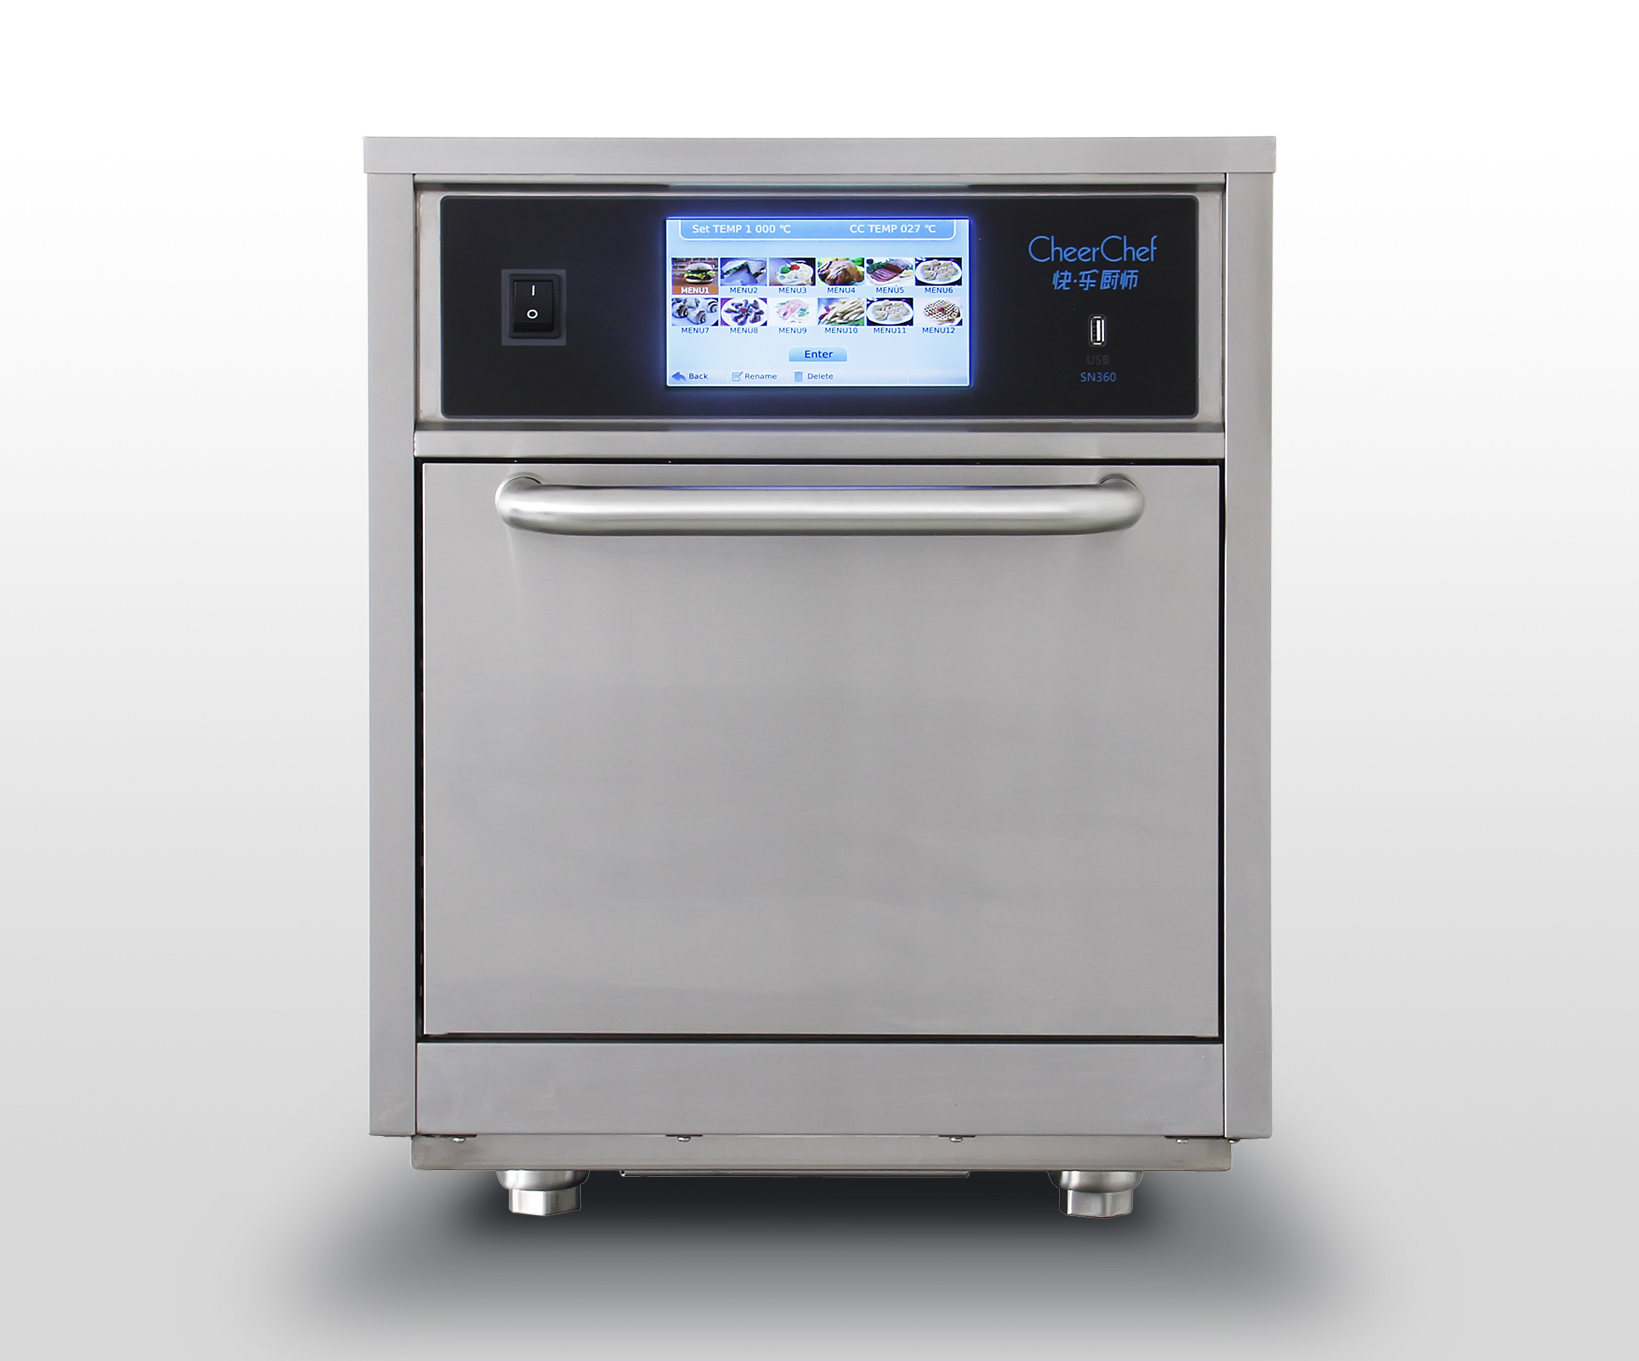 SN360 Model High-speed Accelerated Countertop Cooking Oven